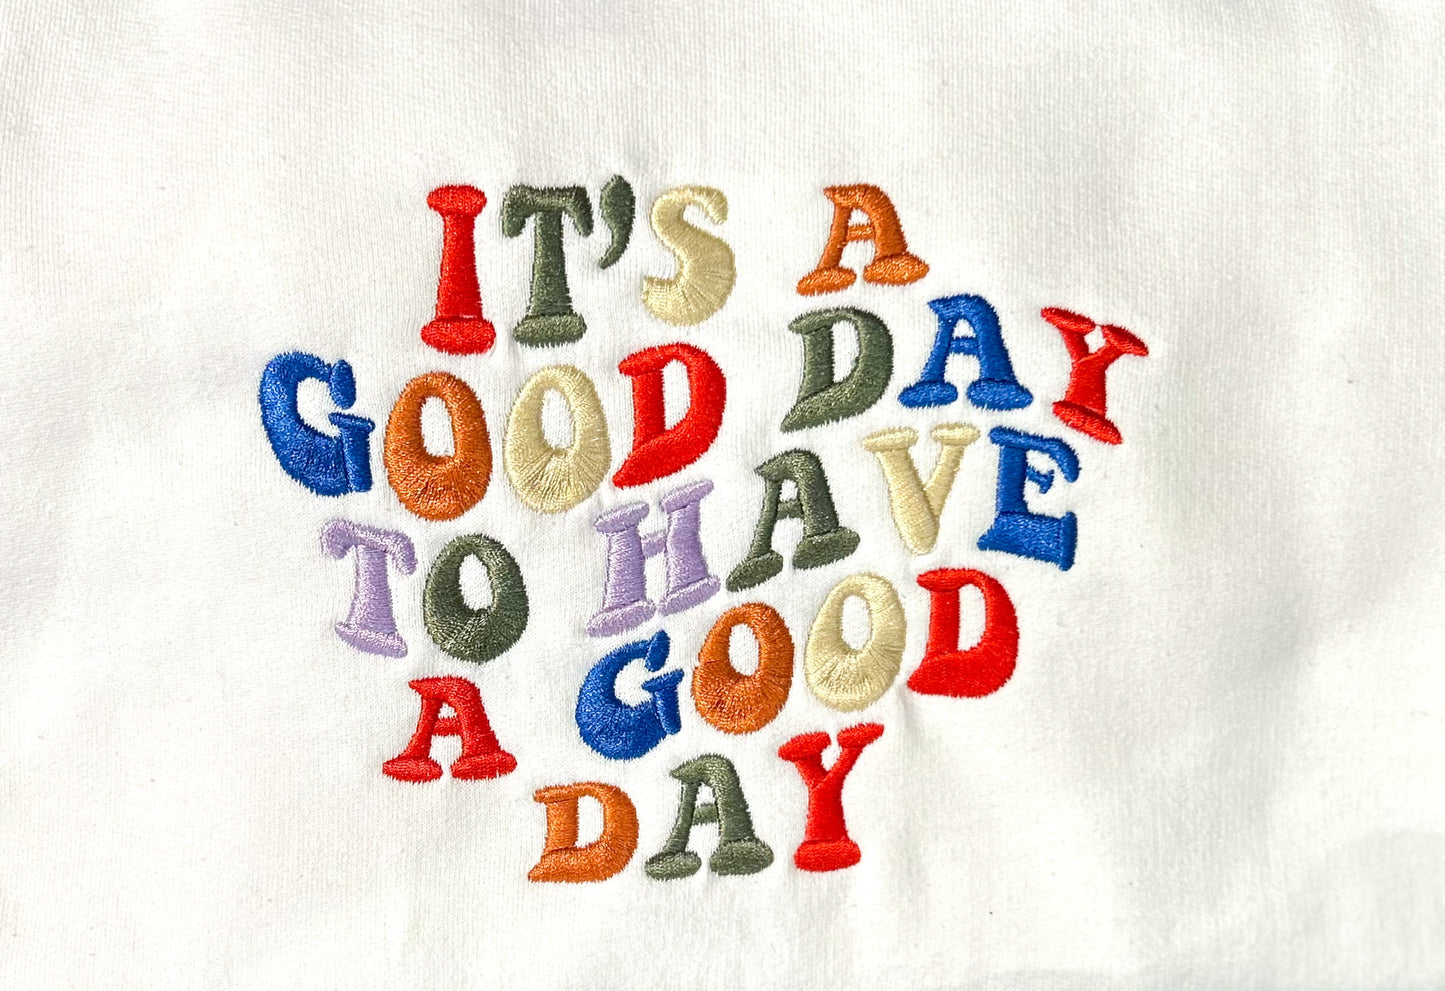 IT'S A GOOD DAY TO HAVE A GOOD DAY